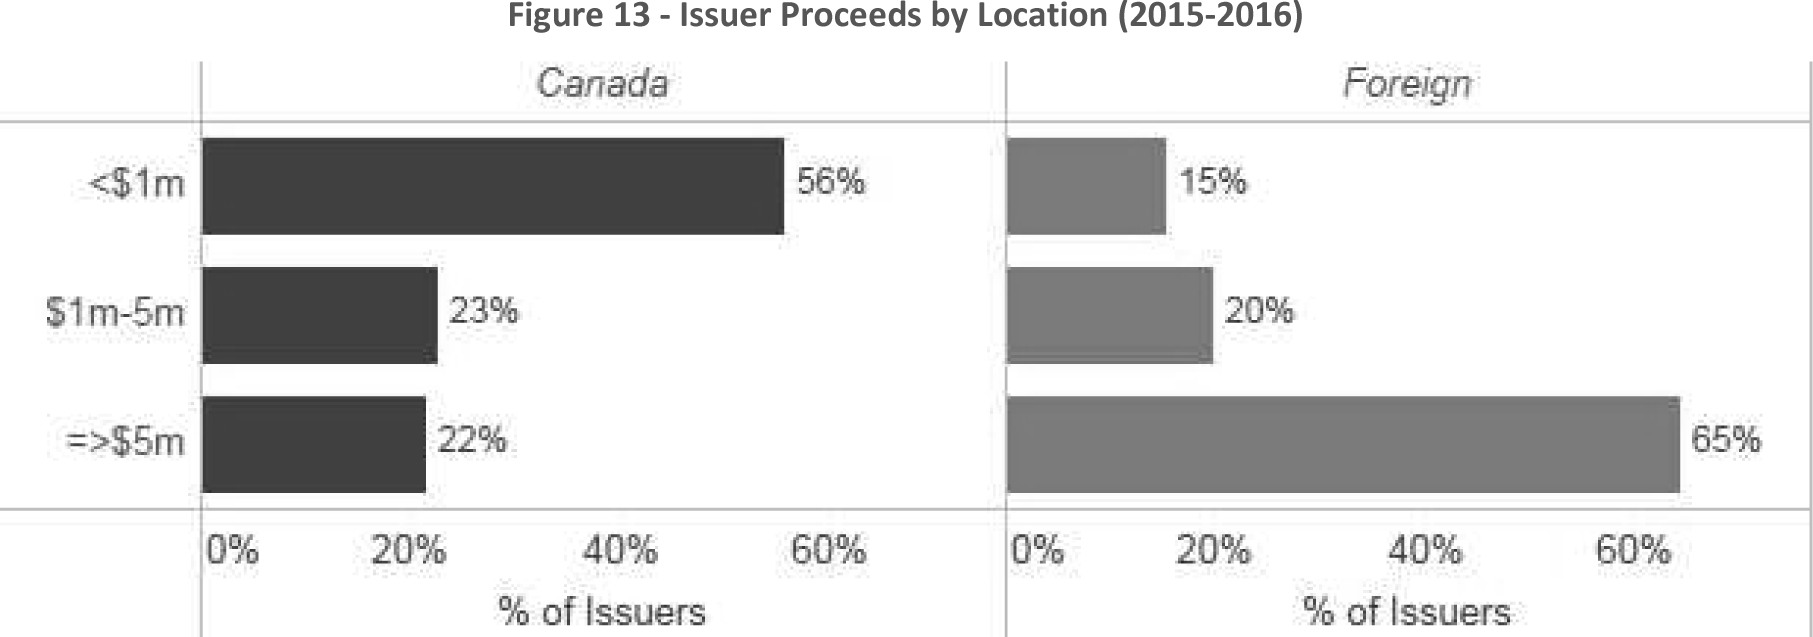 Figure 13 -- Issuer Proceeds by Location (2015-2016)